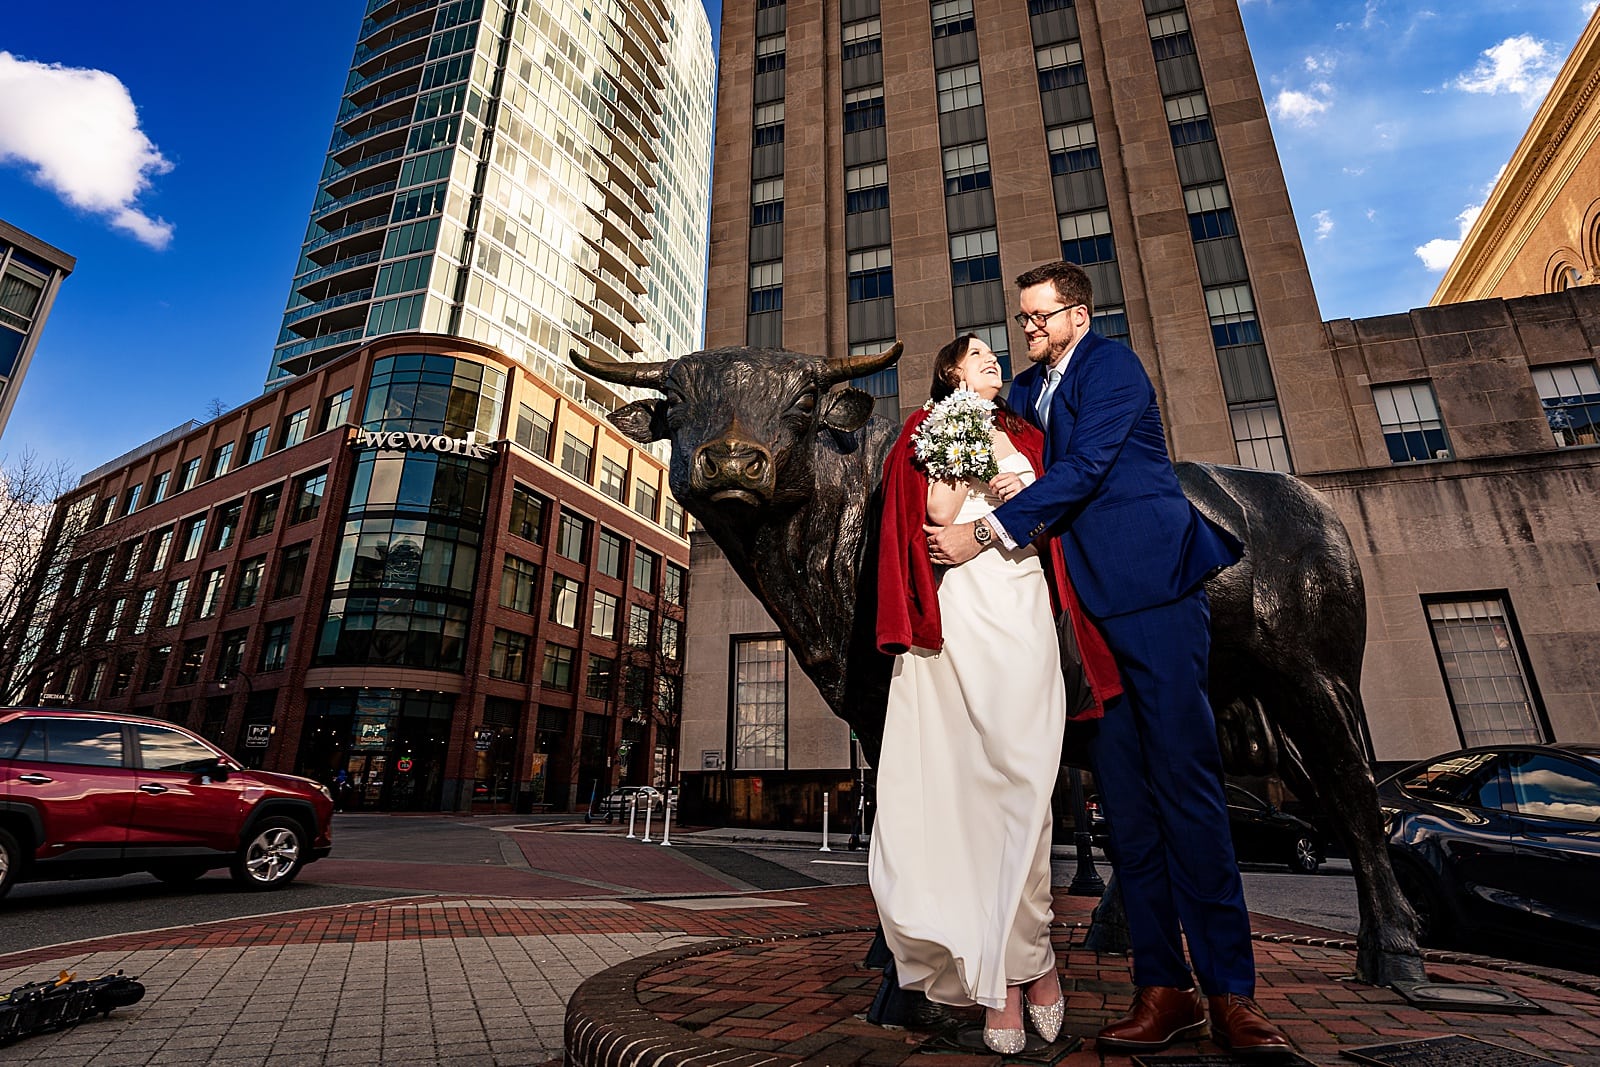 A bride snuggles in the grooms coat to stay warm on their chilly wedding day in downtown Durham, NC